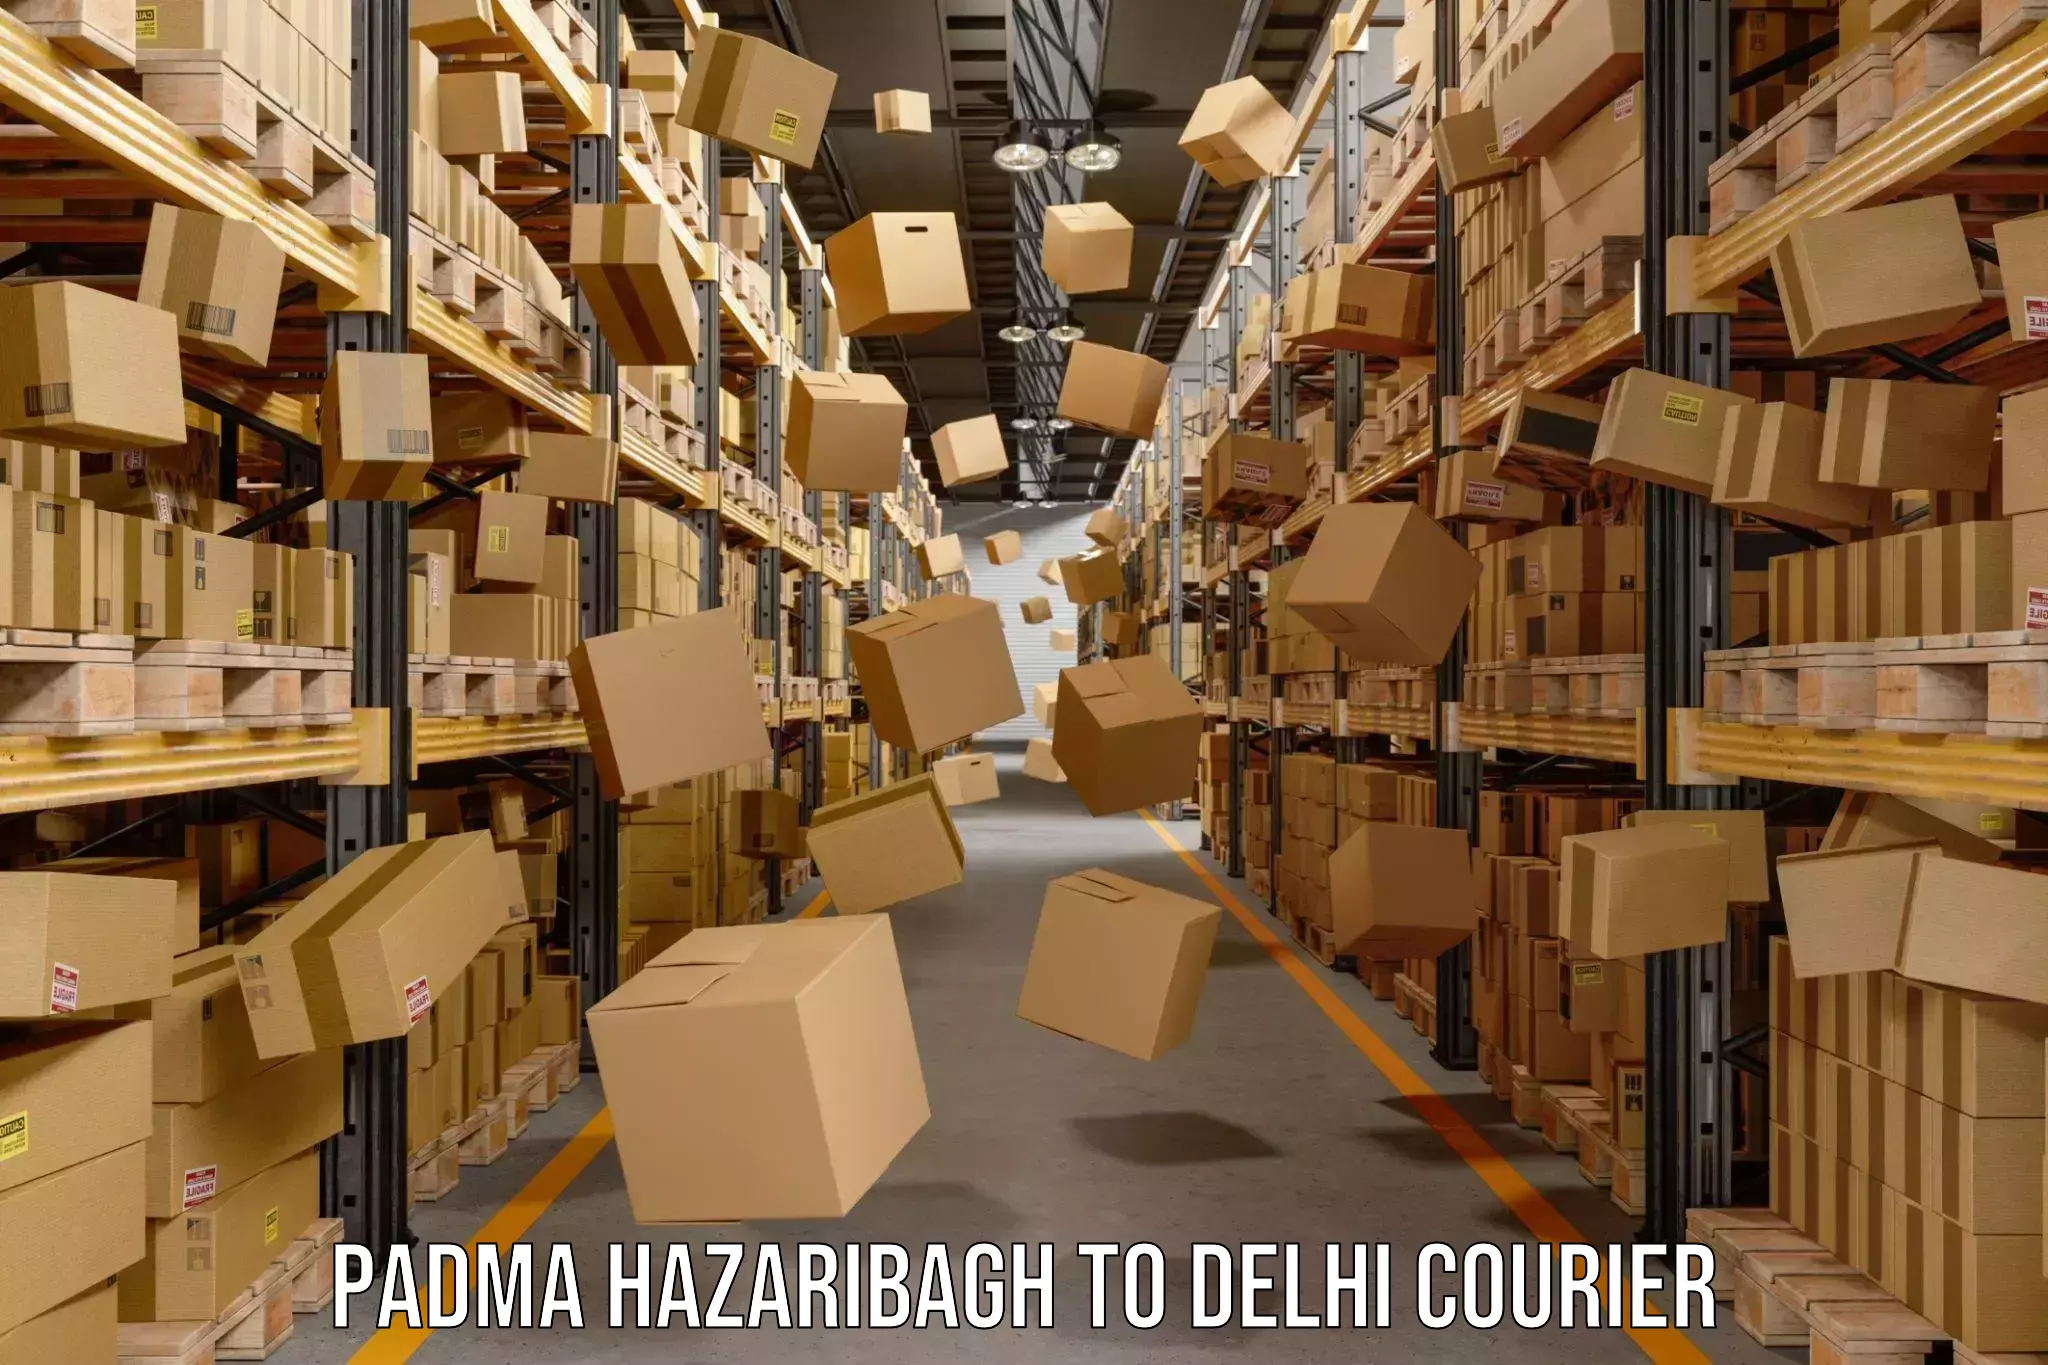 Courier service comparison in Padma Hazaribagh to Indraprastha